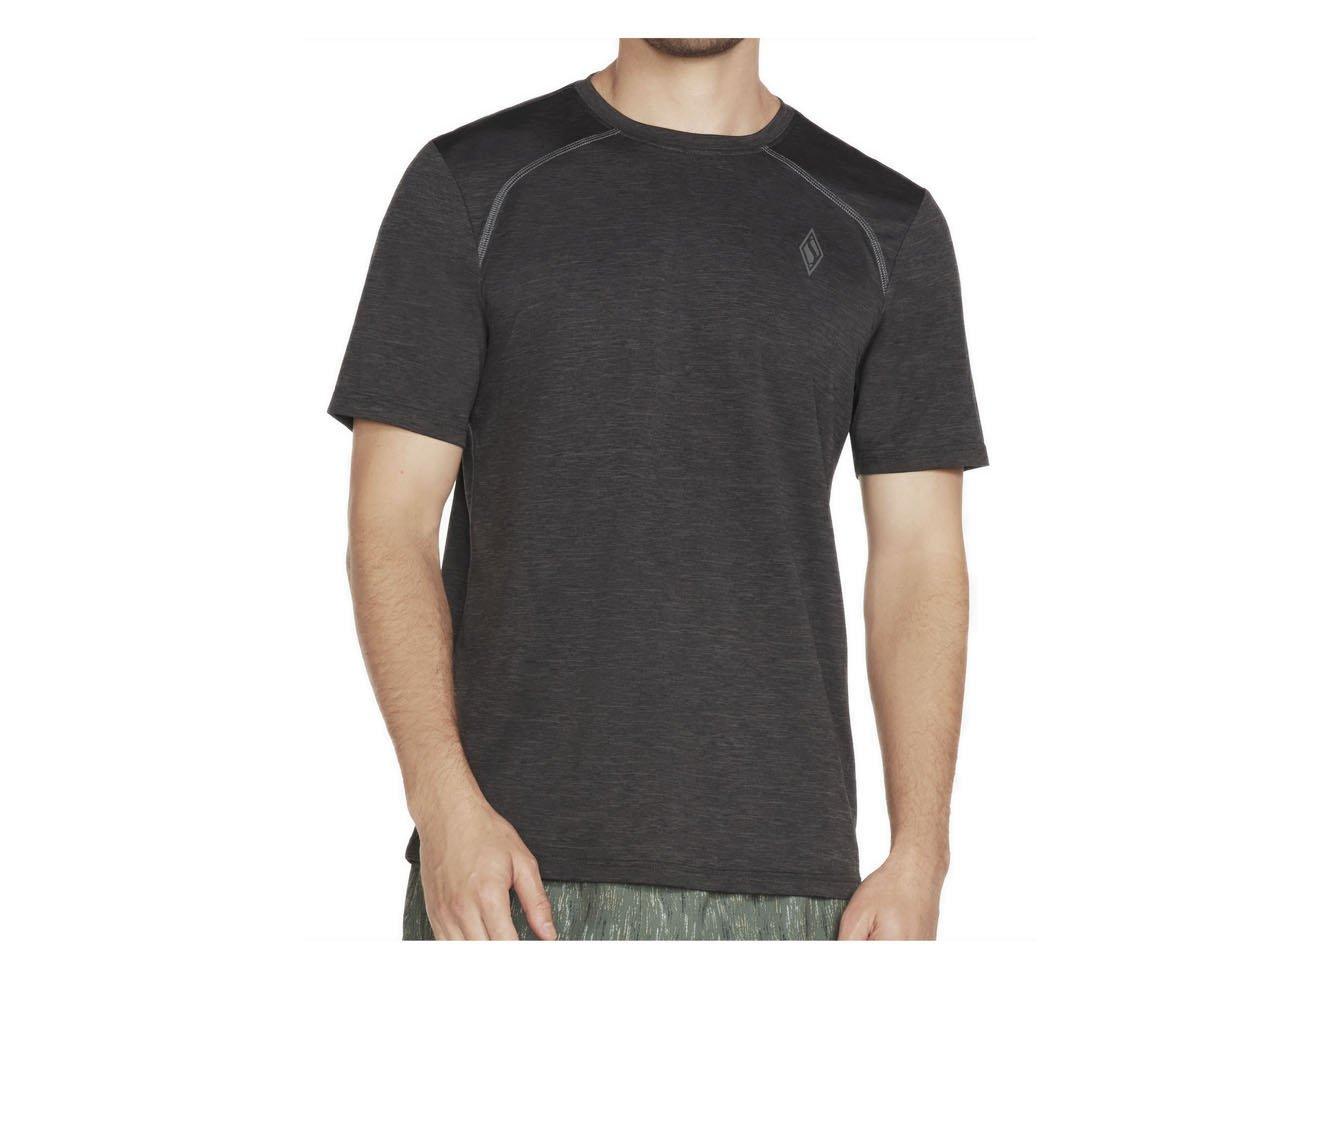 Shop the Skechers Apparel On the Road Tee